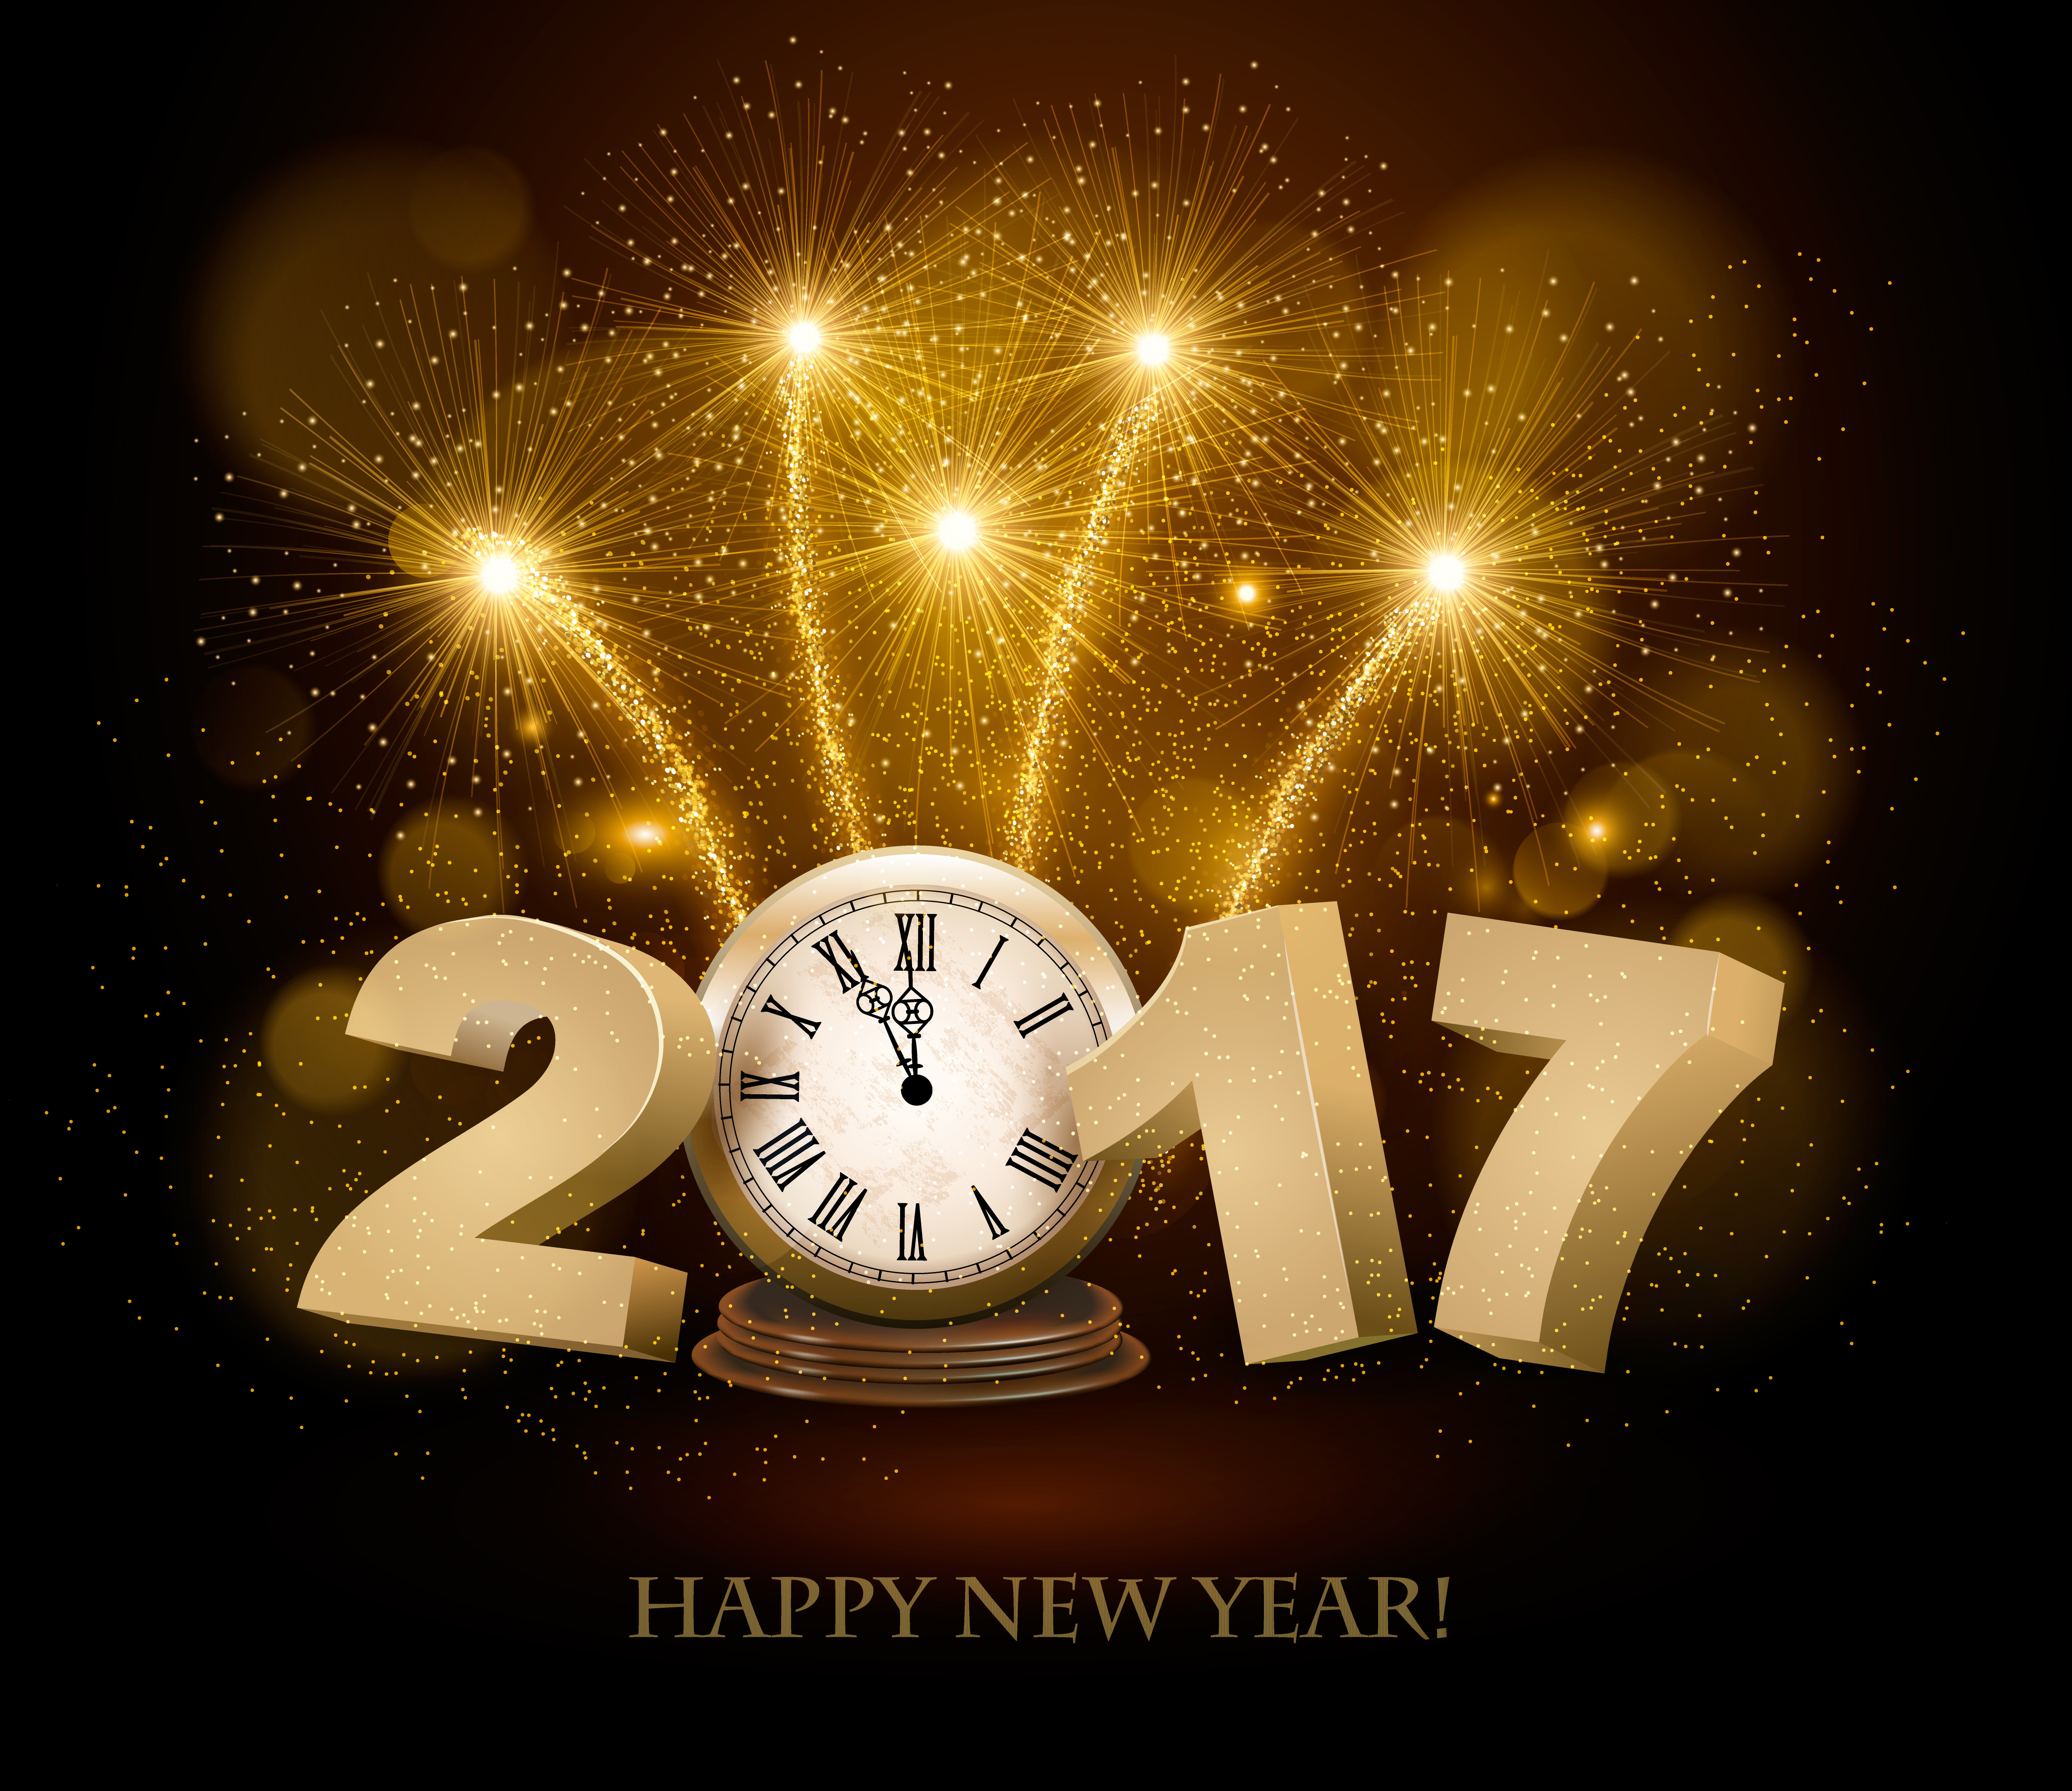 Wallpapers New year wallpapers New Year wallpapers for 2017 New Year s background on the desktop